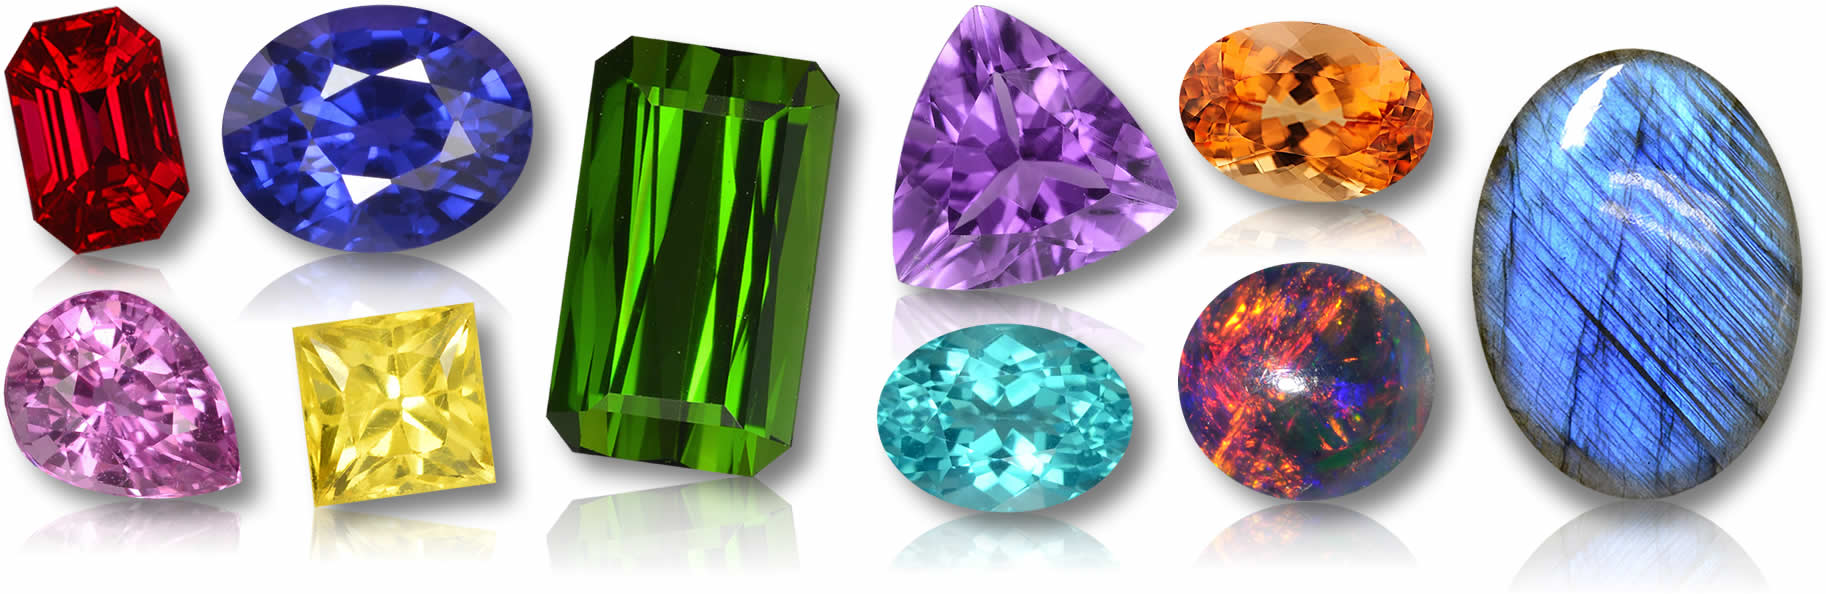 Continue reading to learn more about the amazing selection of alternative  gemstones available for custom engagement rings.